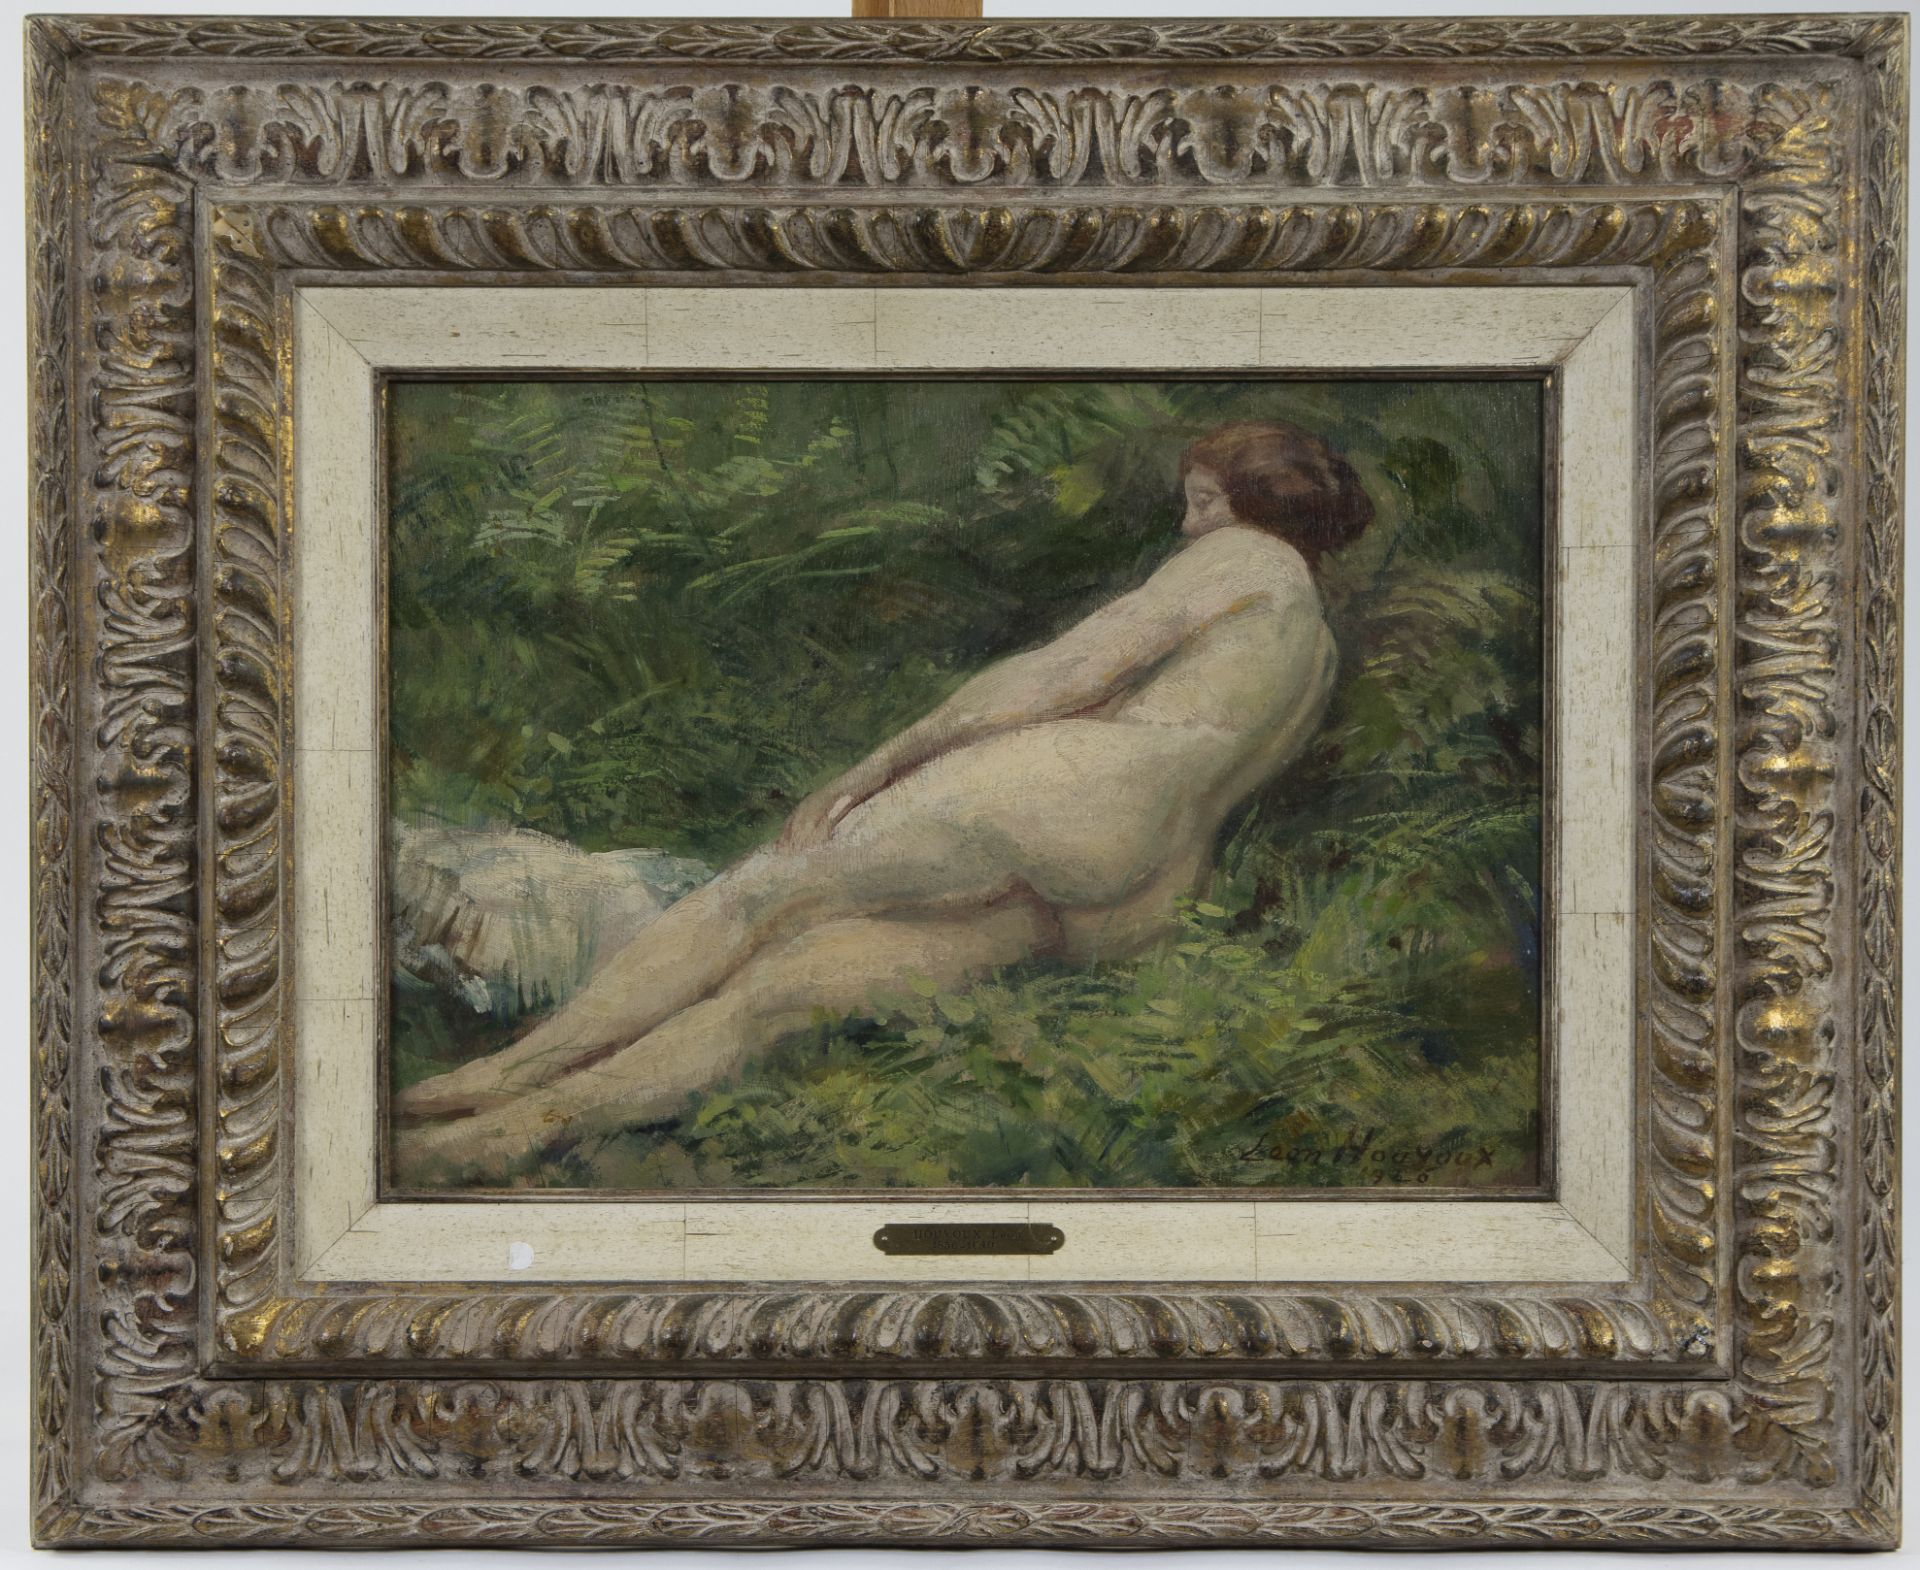 Léon HOUYOUX (1856-1940), oil on panel reclining nude, signed and dated 1926 - Image 2 of 4